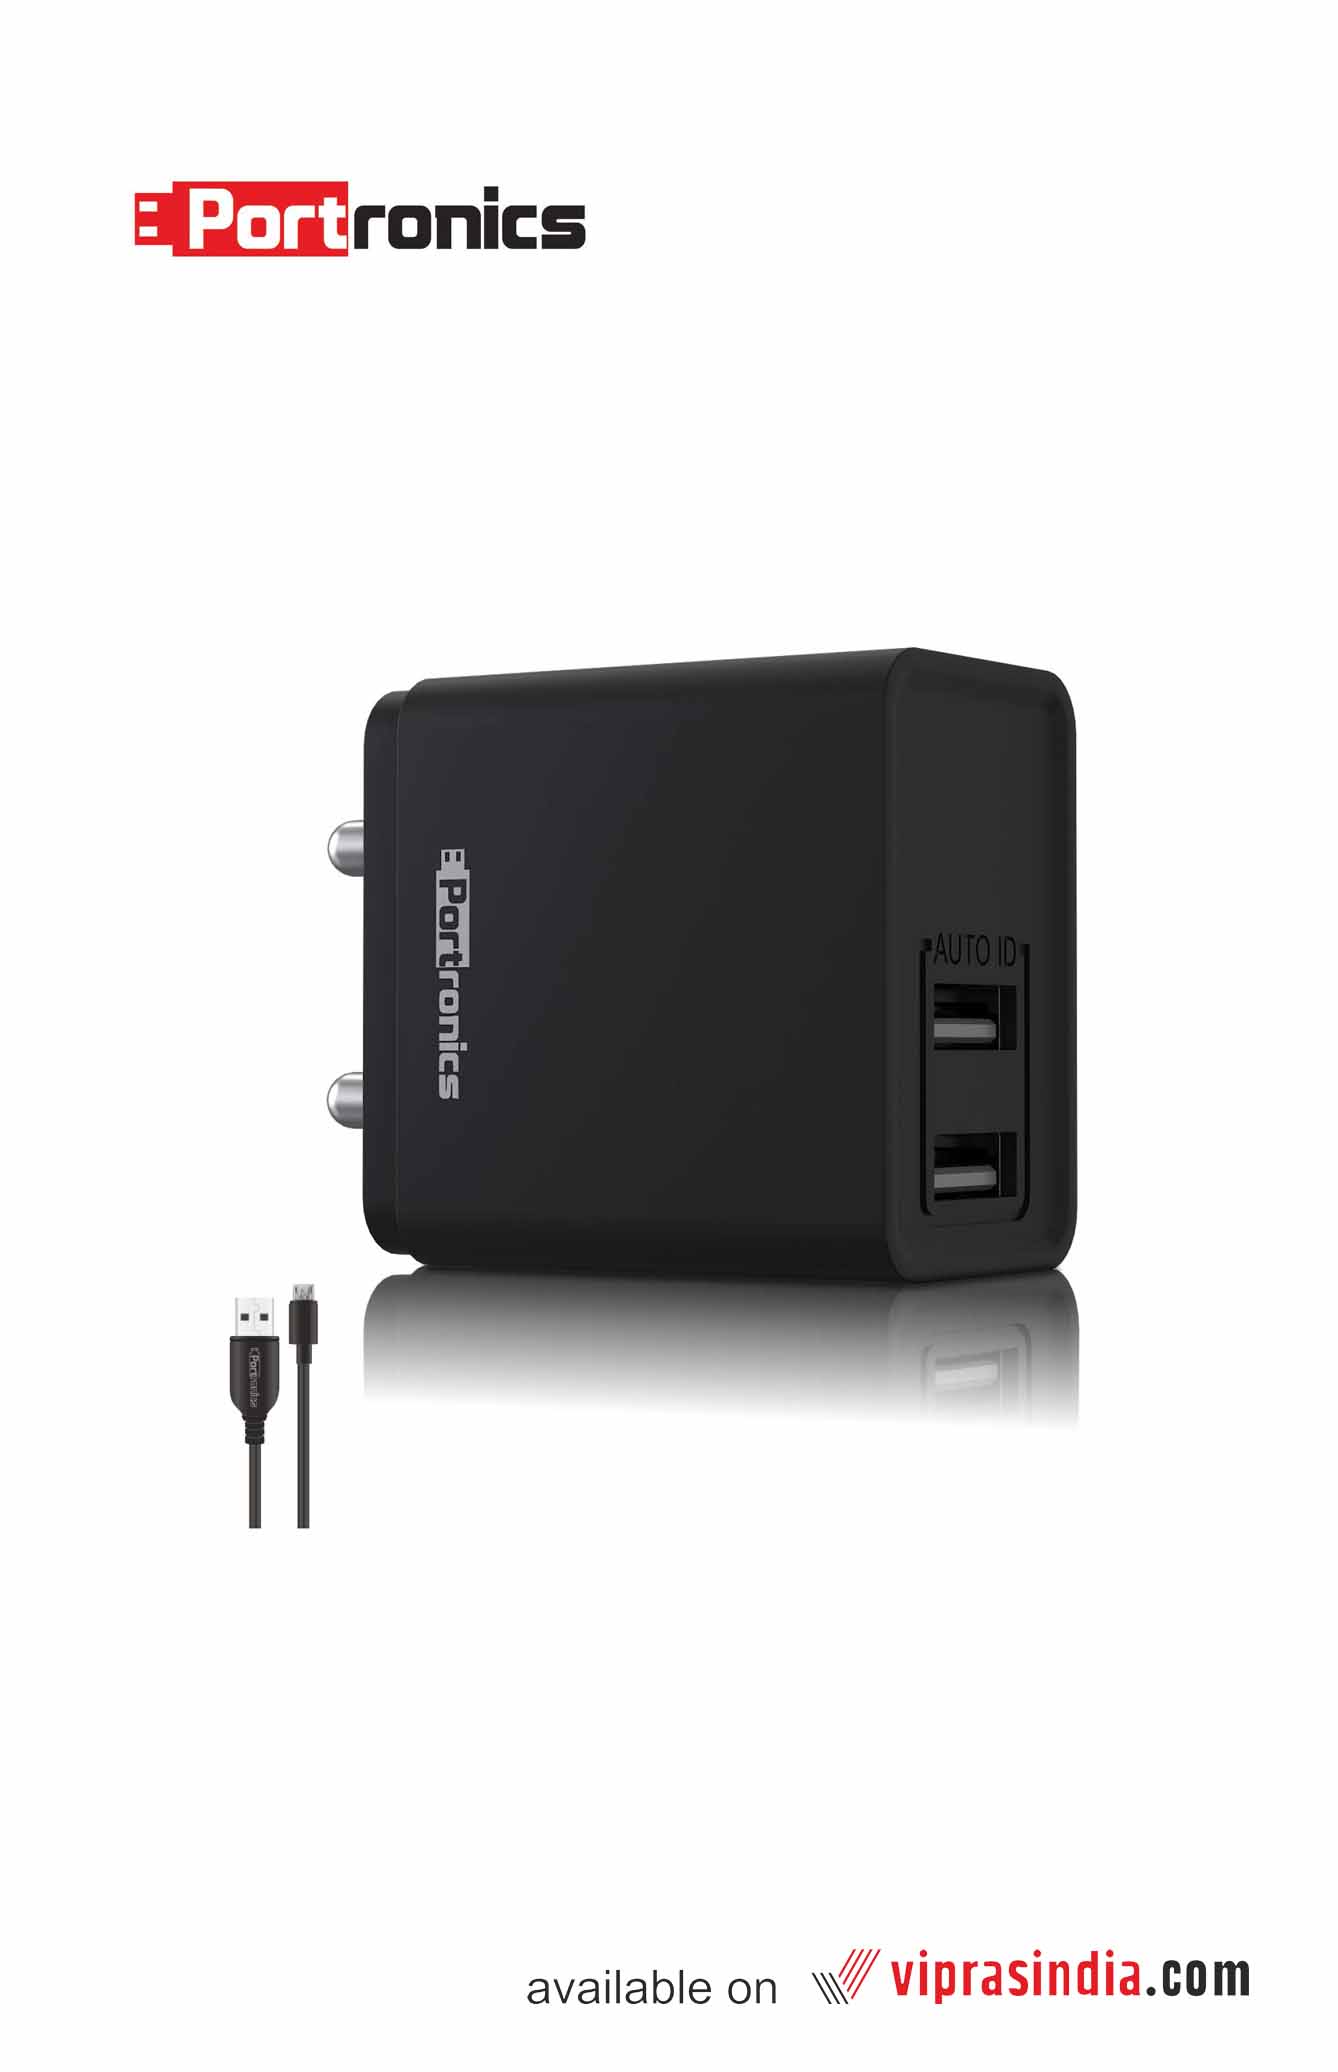  Mobile Charger Portronics  ADAPTO 649  with  Cable  